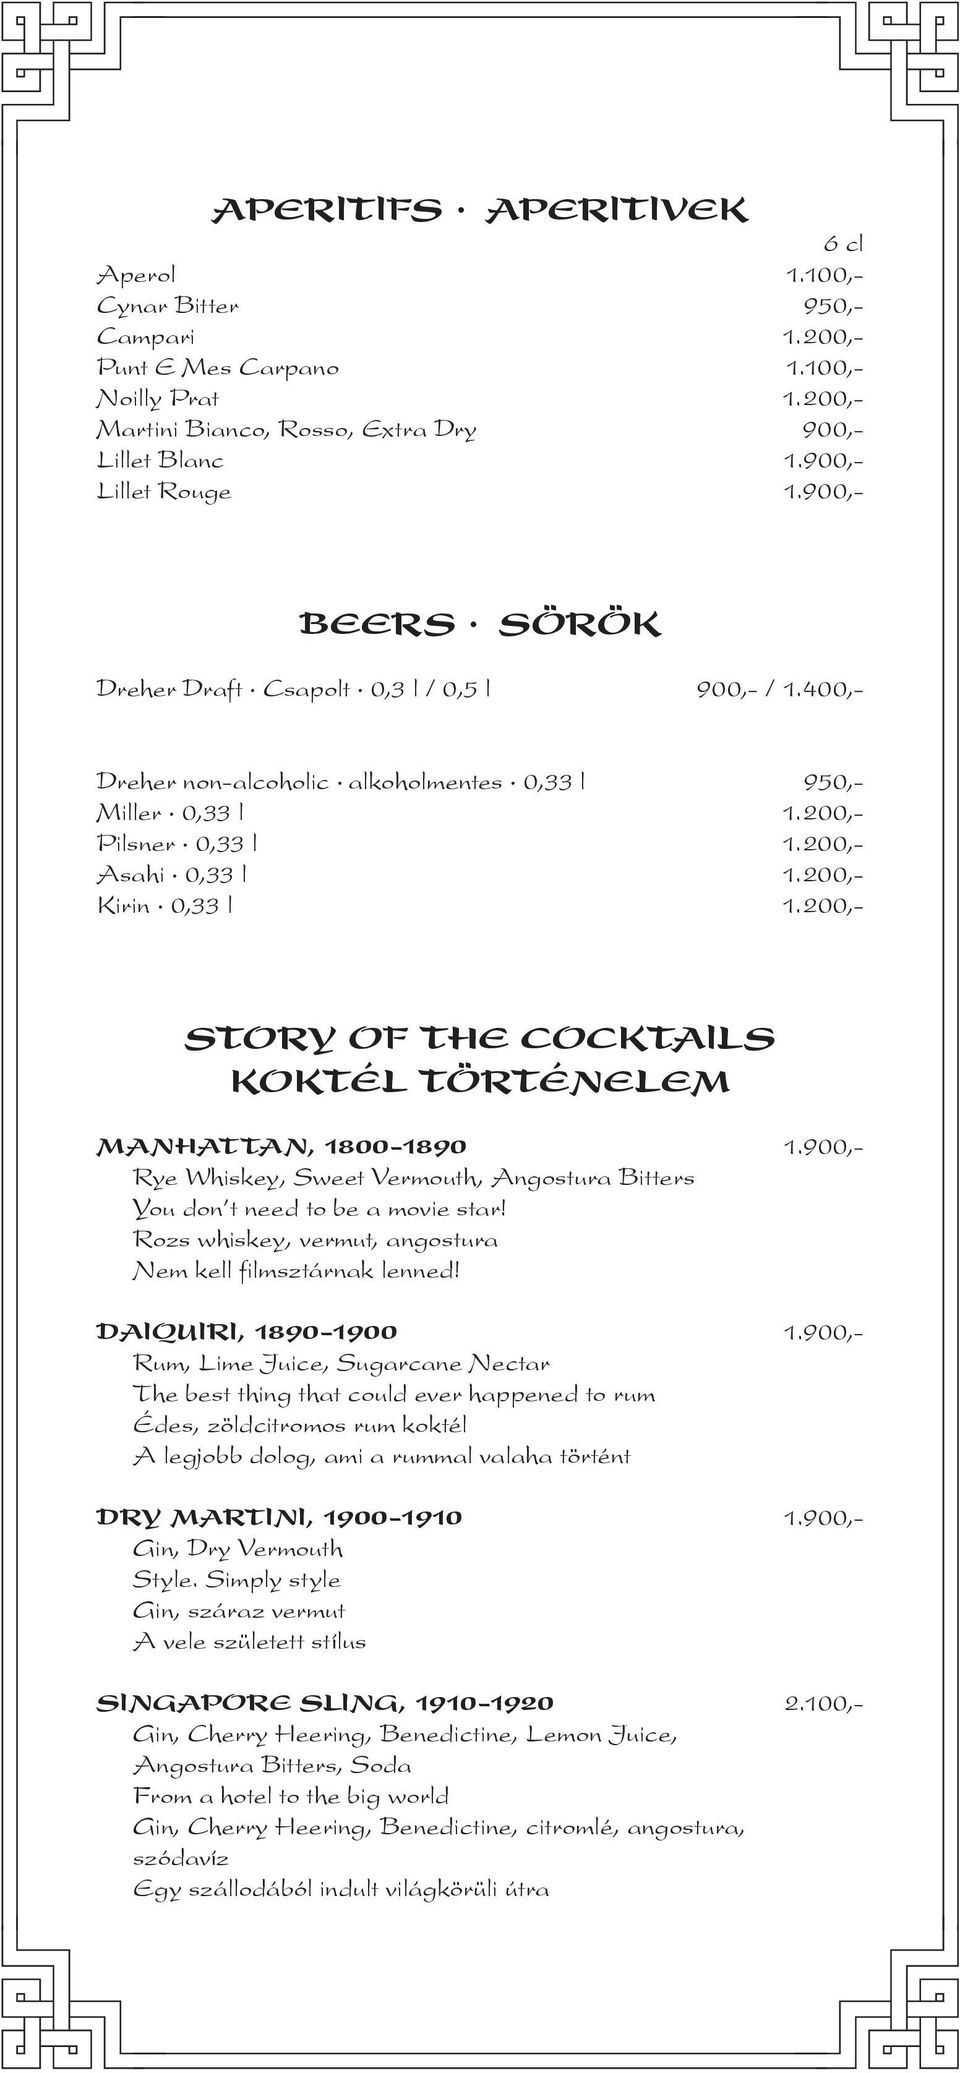 200,- STORY OF THE COCKTAILS KOKTÉL TÖRTÉNELEM MANHATTAN, 1800-1890 1.900,- Rye Whiskey, Sweet Vermouth, Angostura Bitters You don t need to be a movie star!